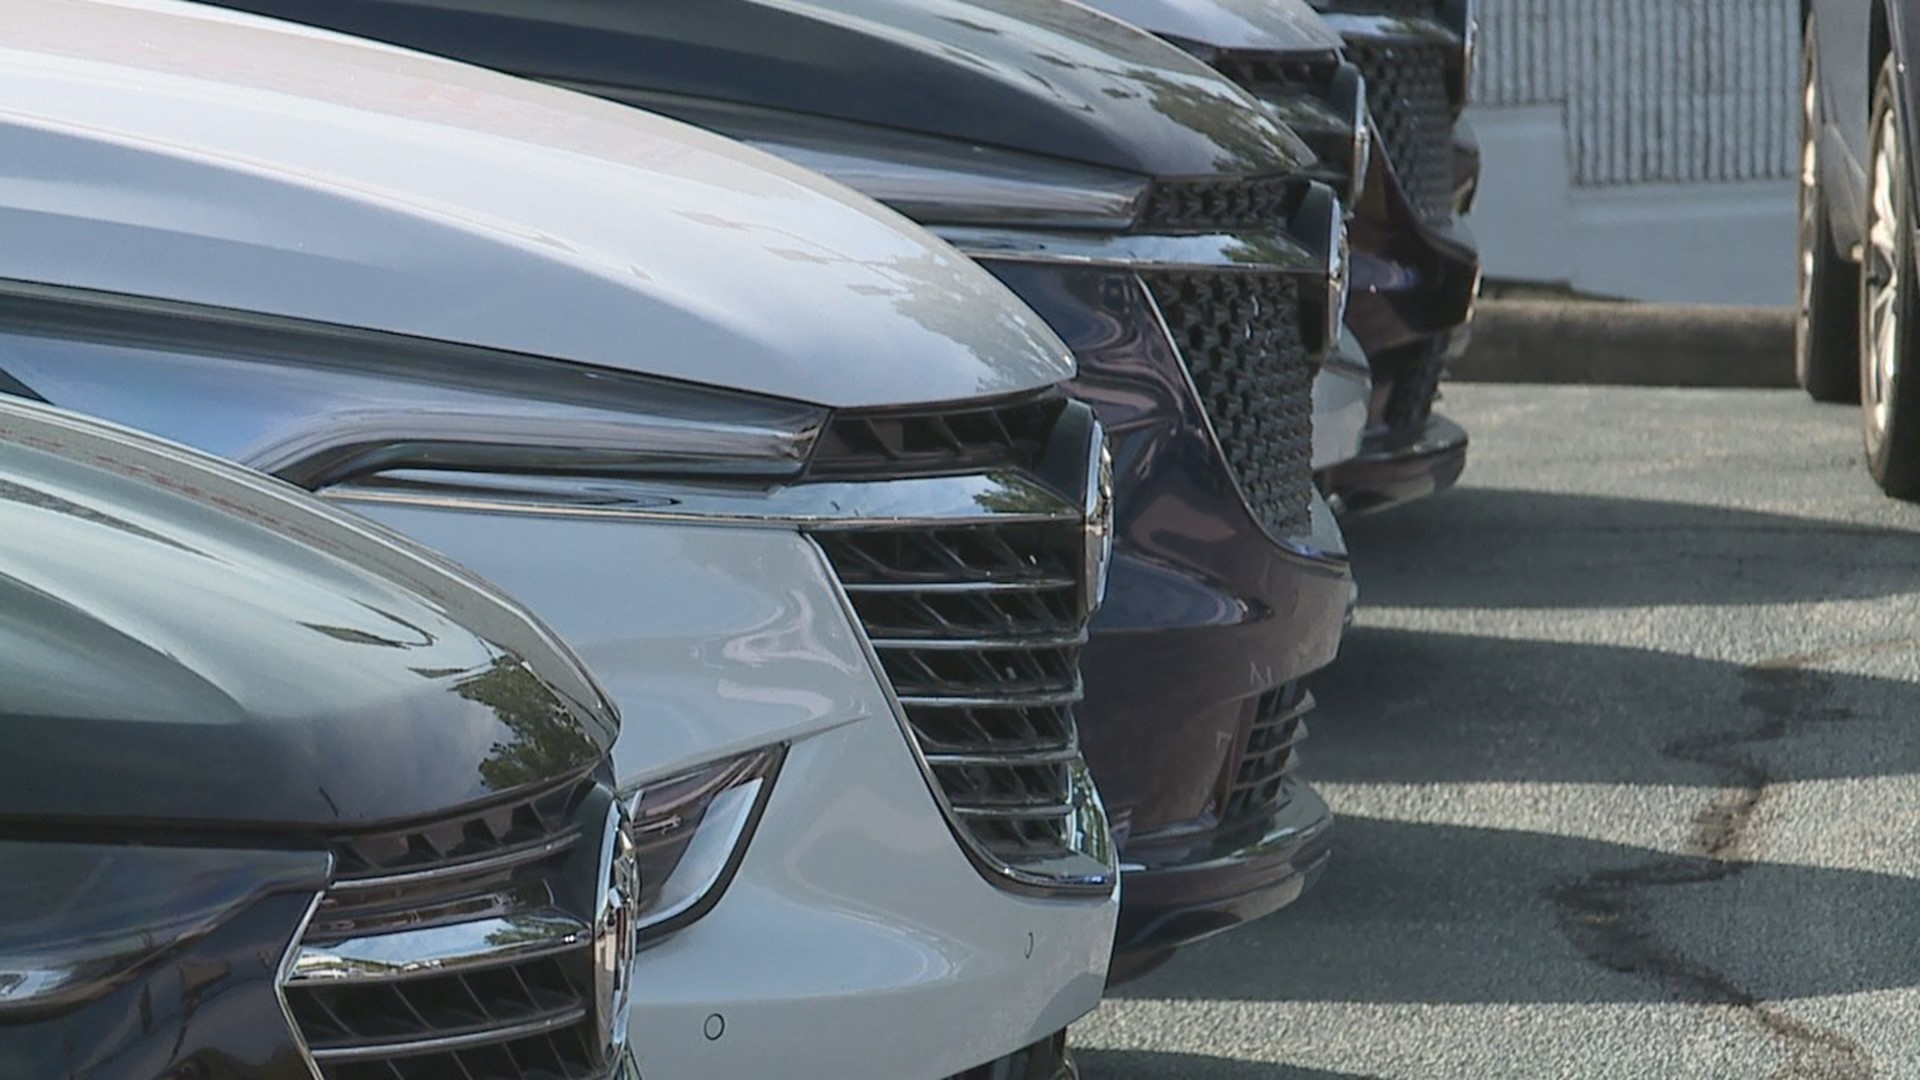 Local car dealerships are stocking up on vehicles, worried that factory shutdowns could lead to lower inventory if the UAW strike does not end.